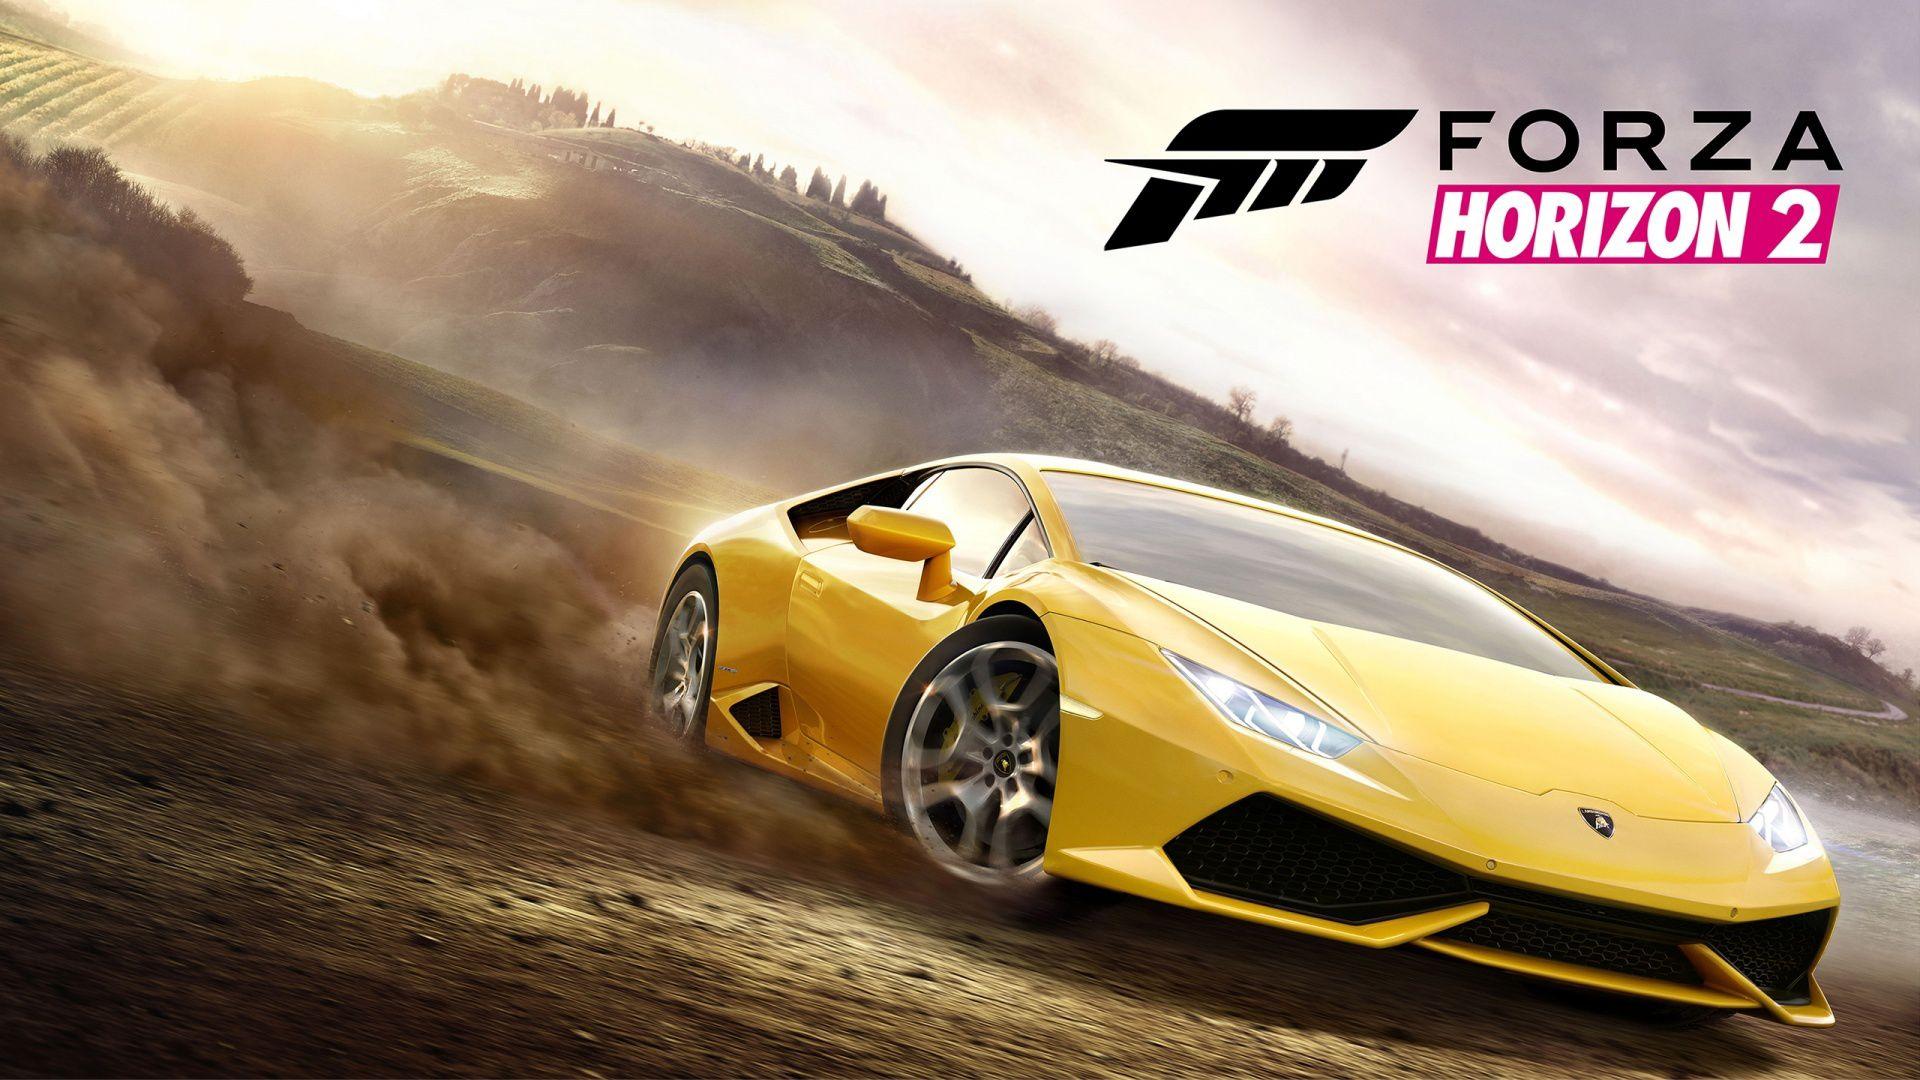 Forza Horizon 2 - First hour of Gameplay (Introduction, first championship,  content overview) 